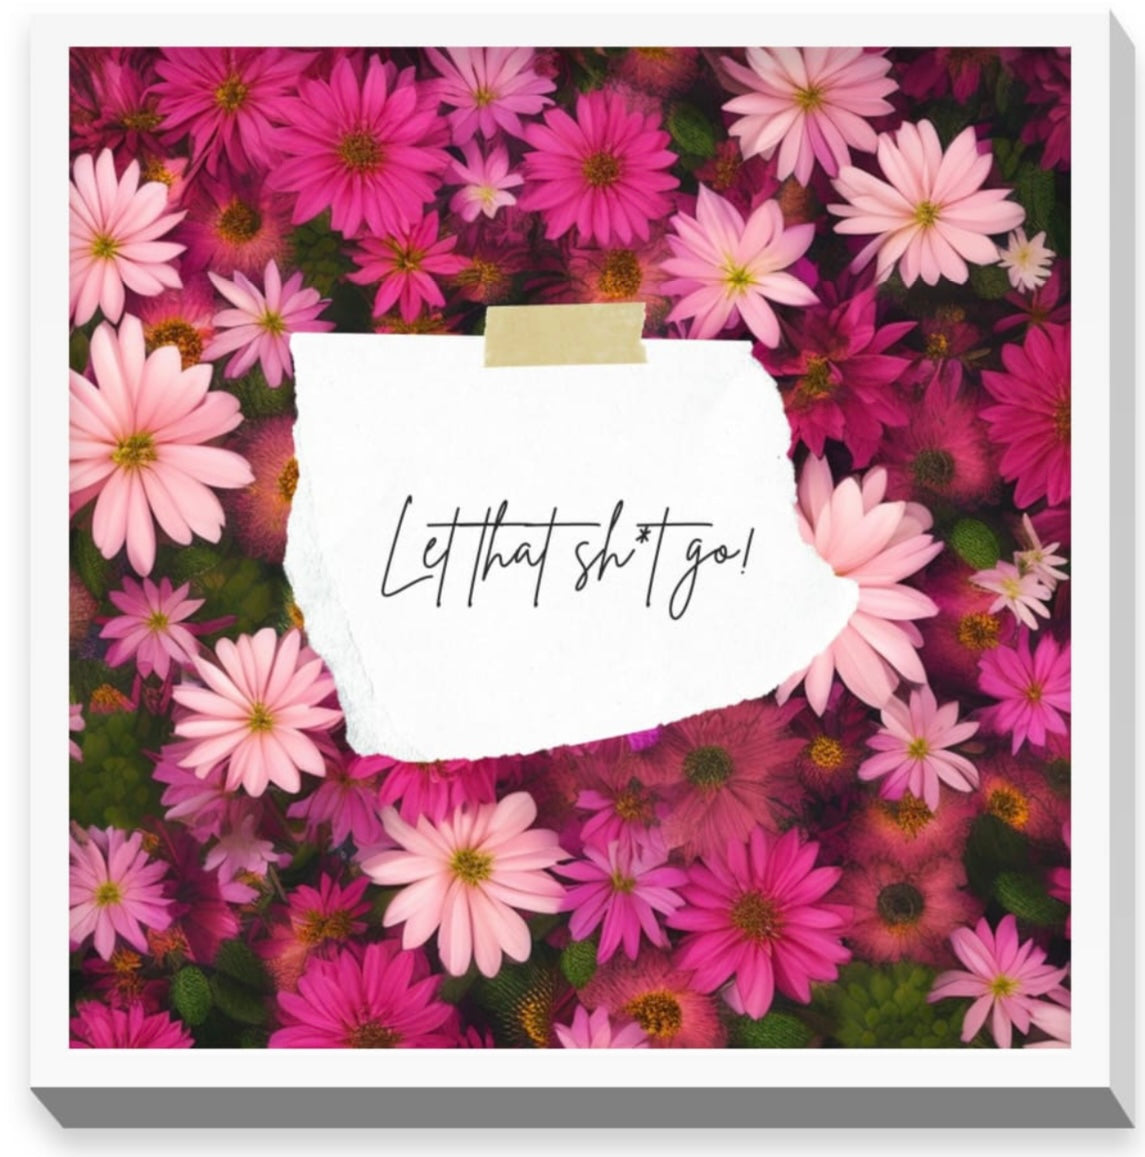 Let That **** Go | 8x8 Inspirational Wall Art Home and Office Decor With Frame